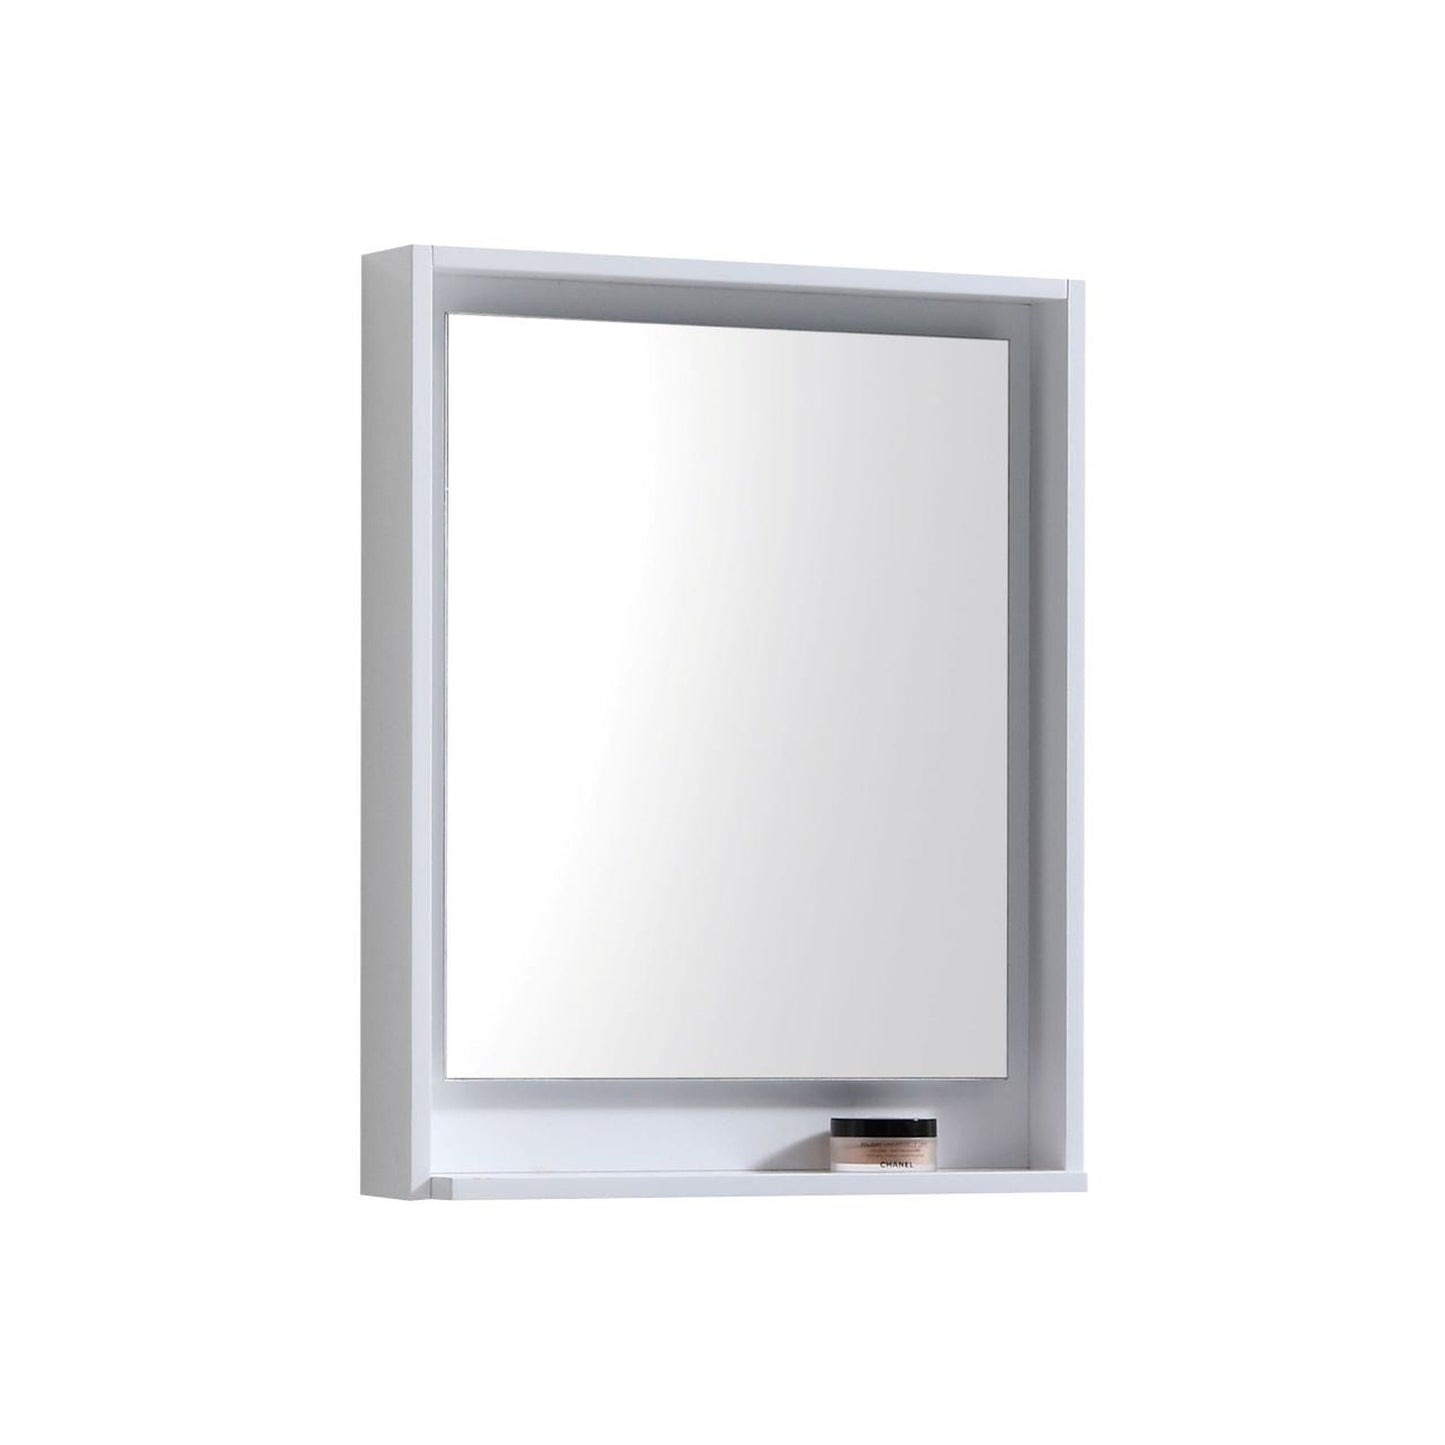 KubeBath Haus 24" White Acrylic Sink With Chrome Finish Stainless Steel Console And 24" White Framed Mirror With Shelf